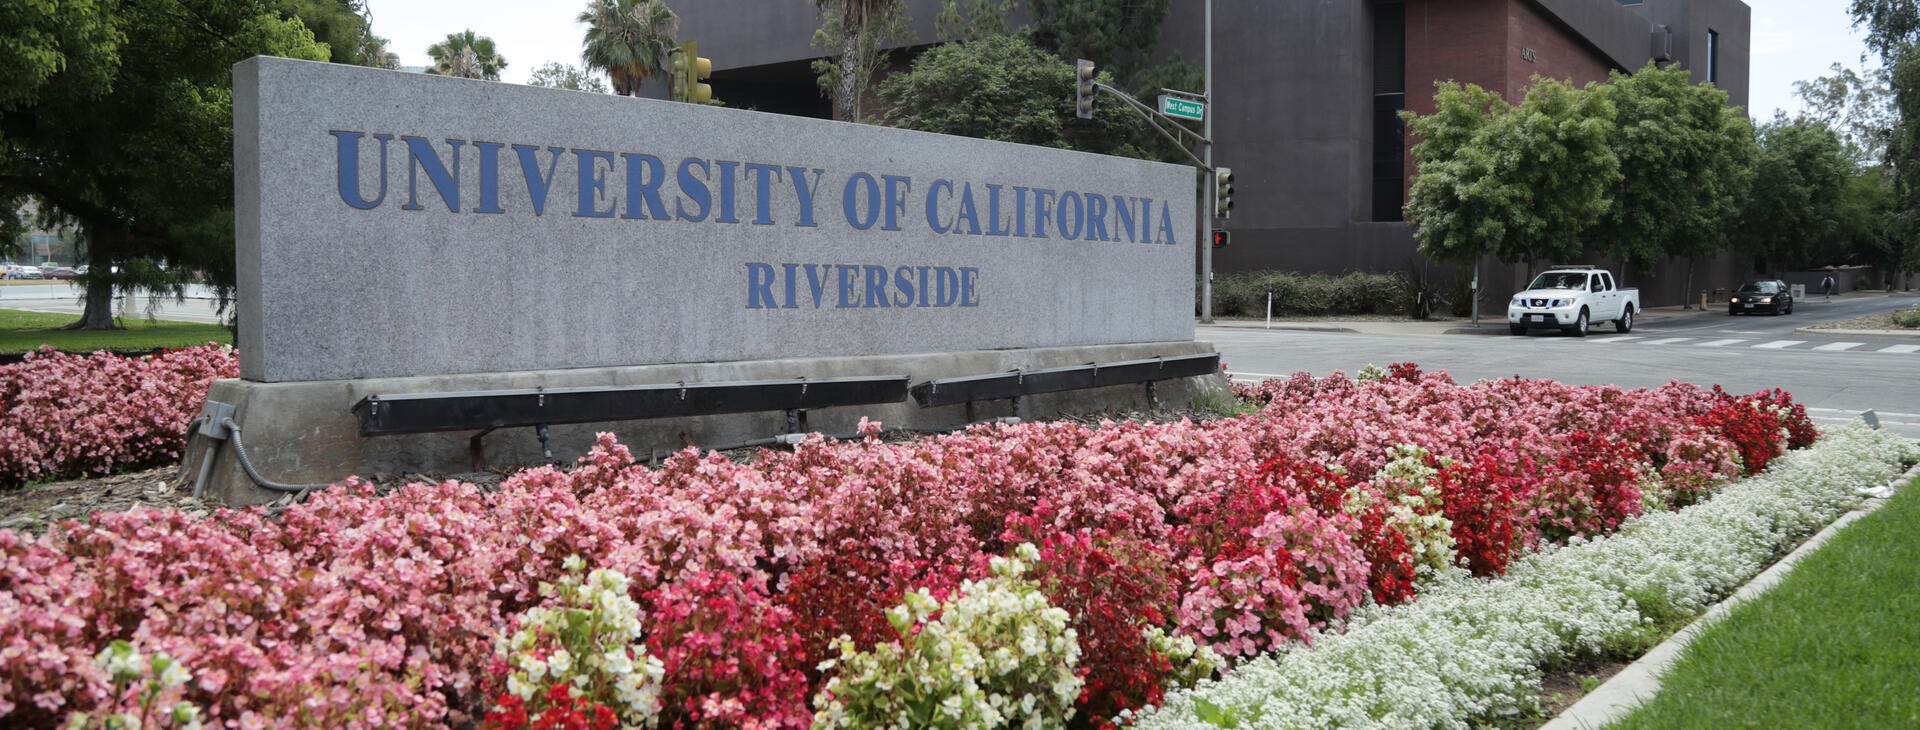 Sign in front of campus, reads University of California Riverside.